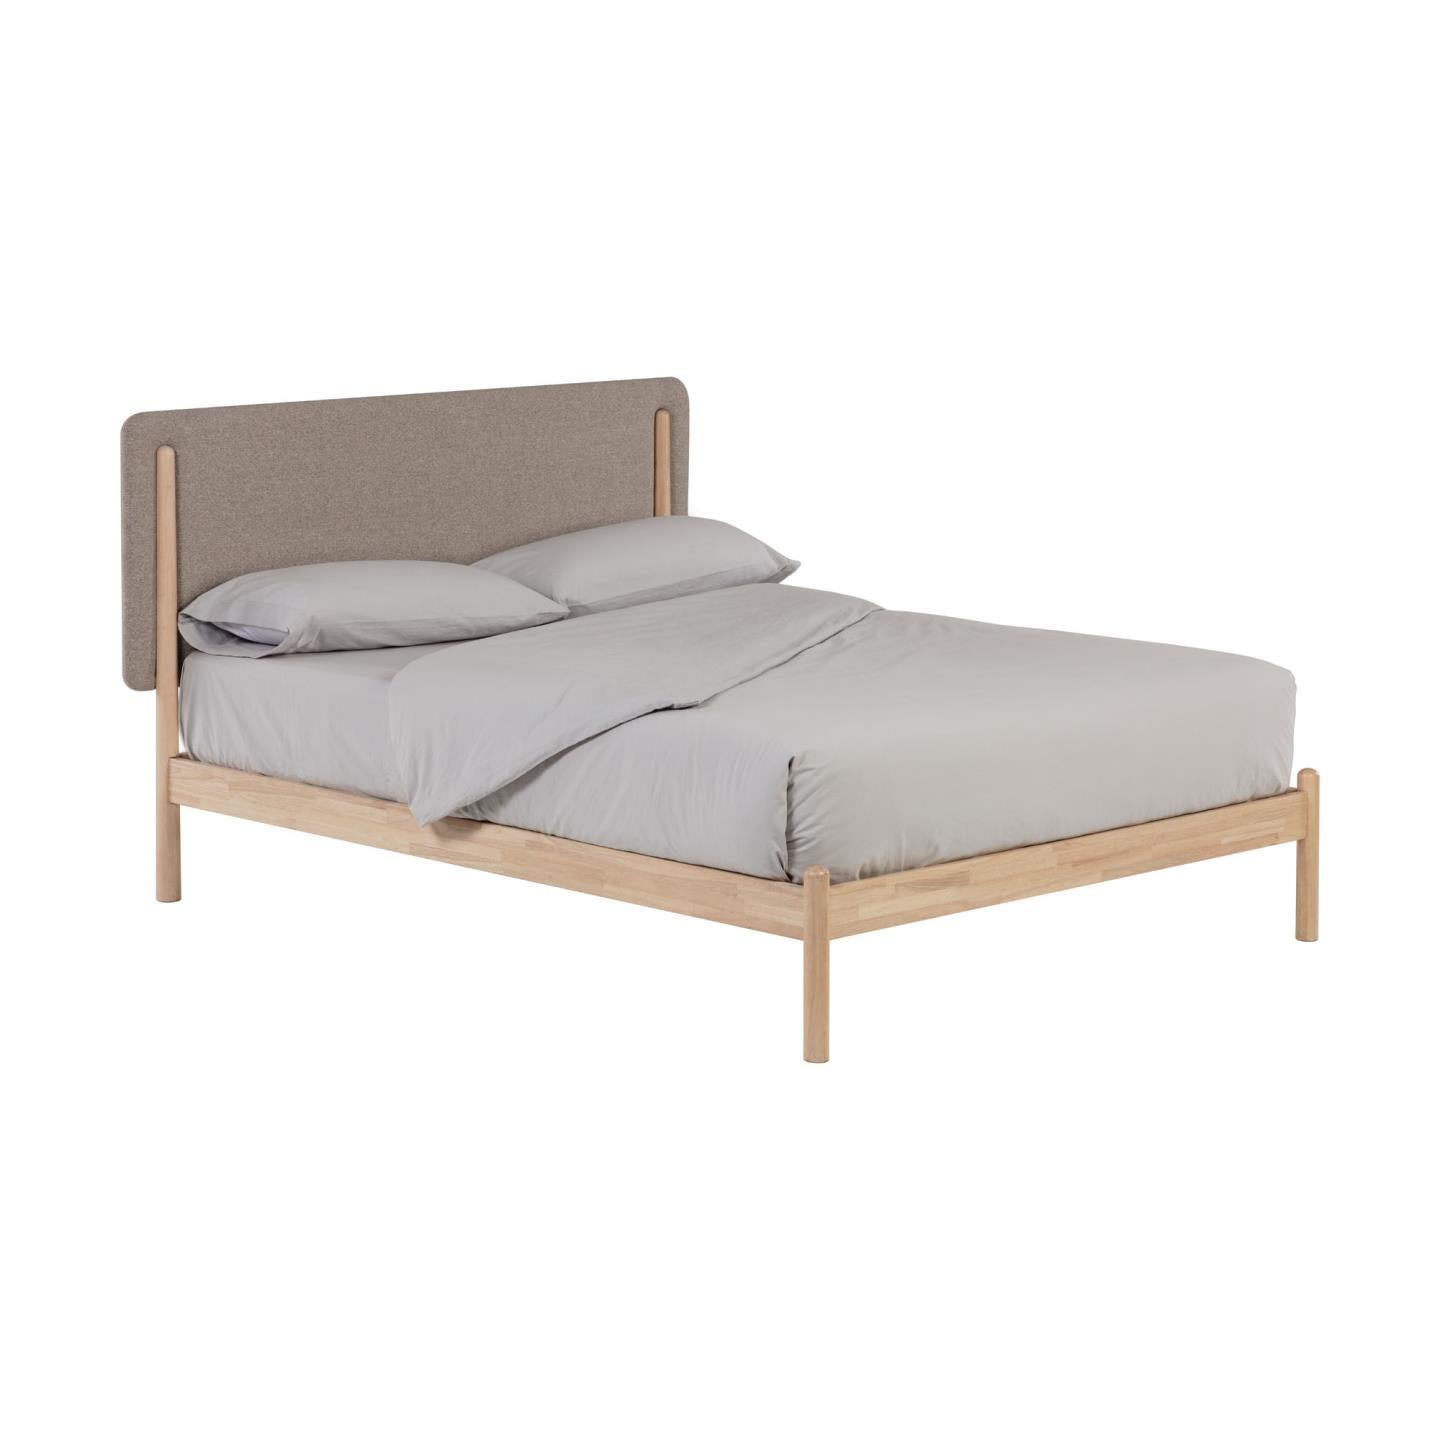 Shayndel bed made from solid rubber wood, for a 160 x 200 cm mattress